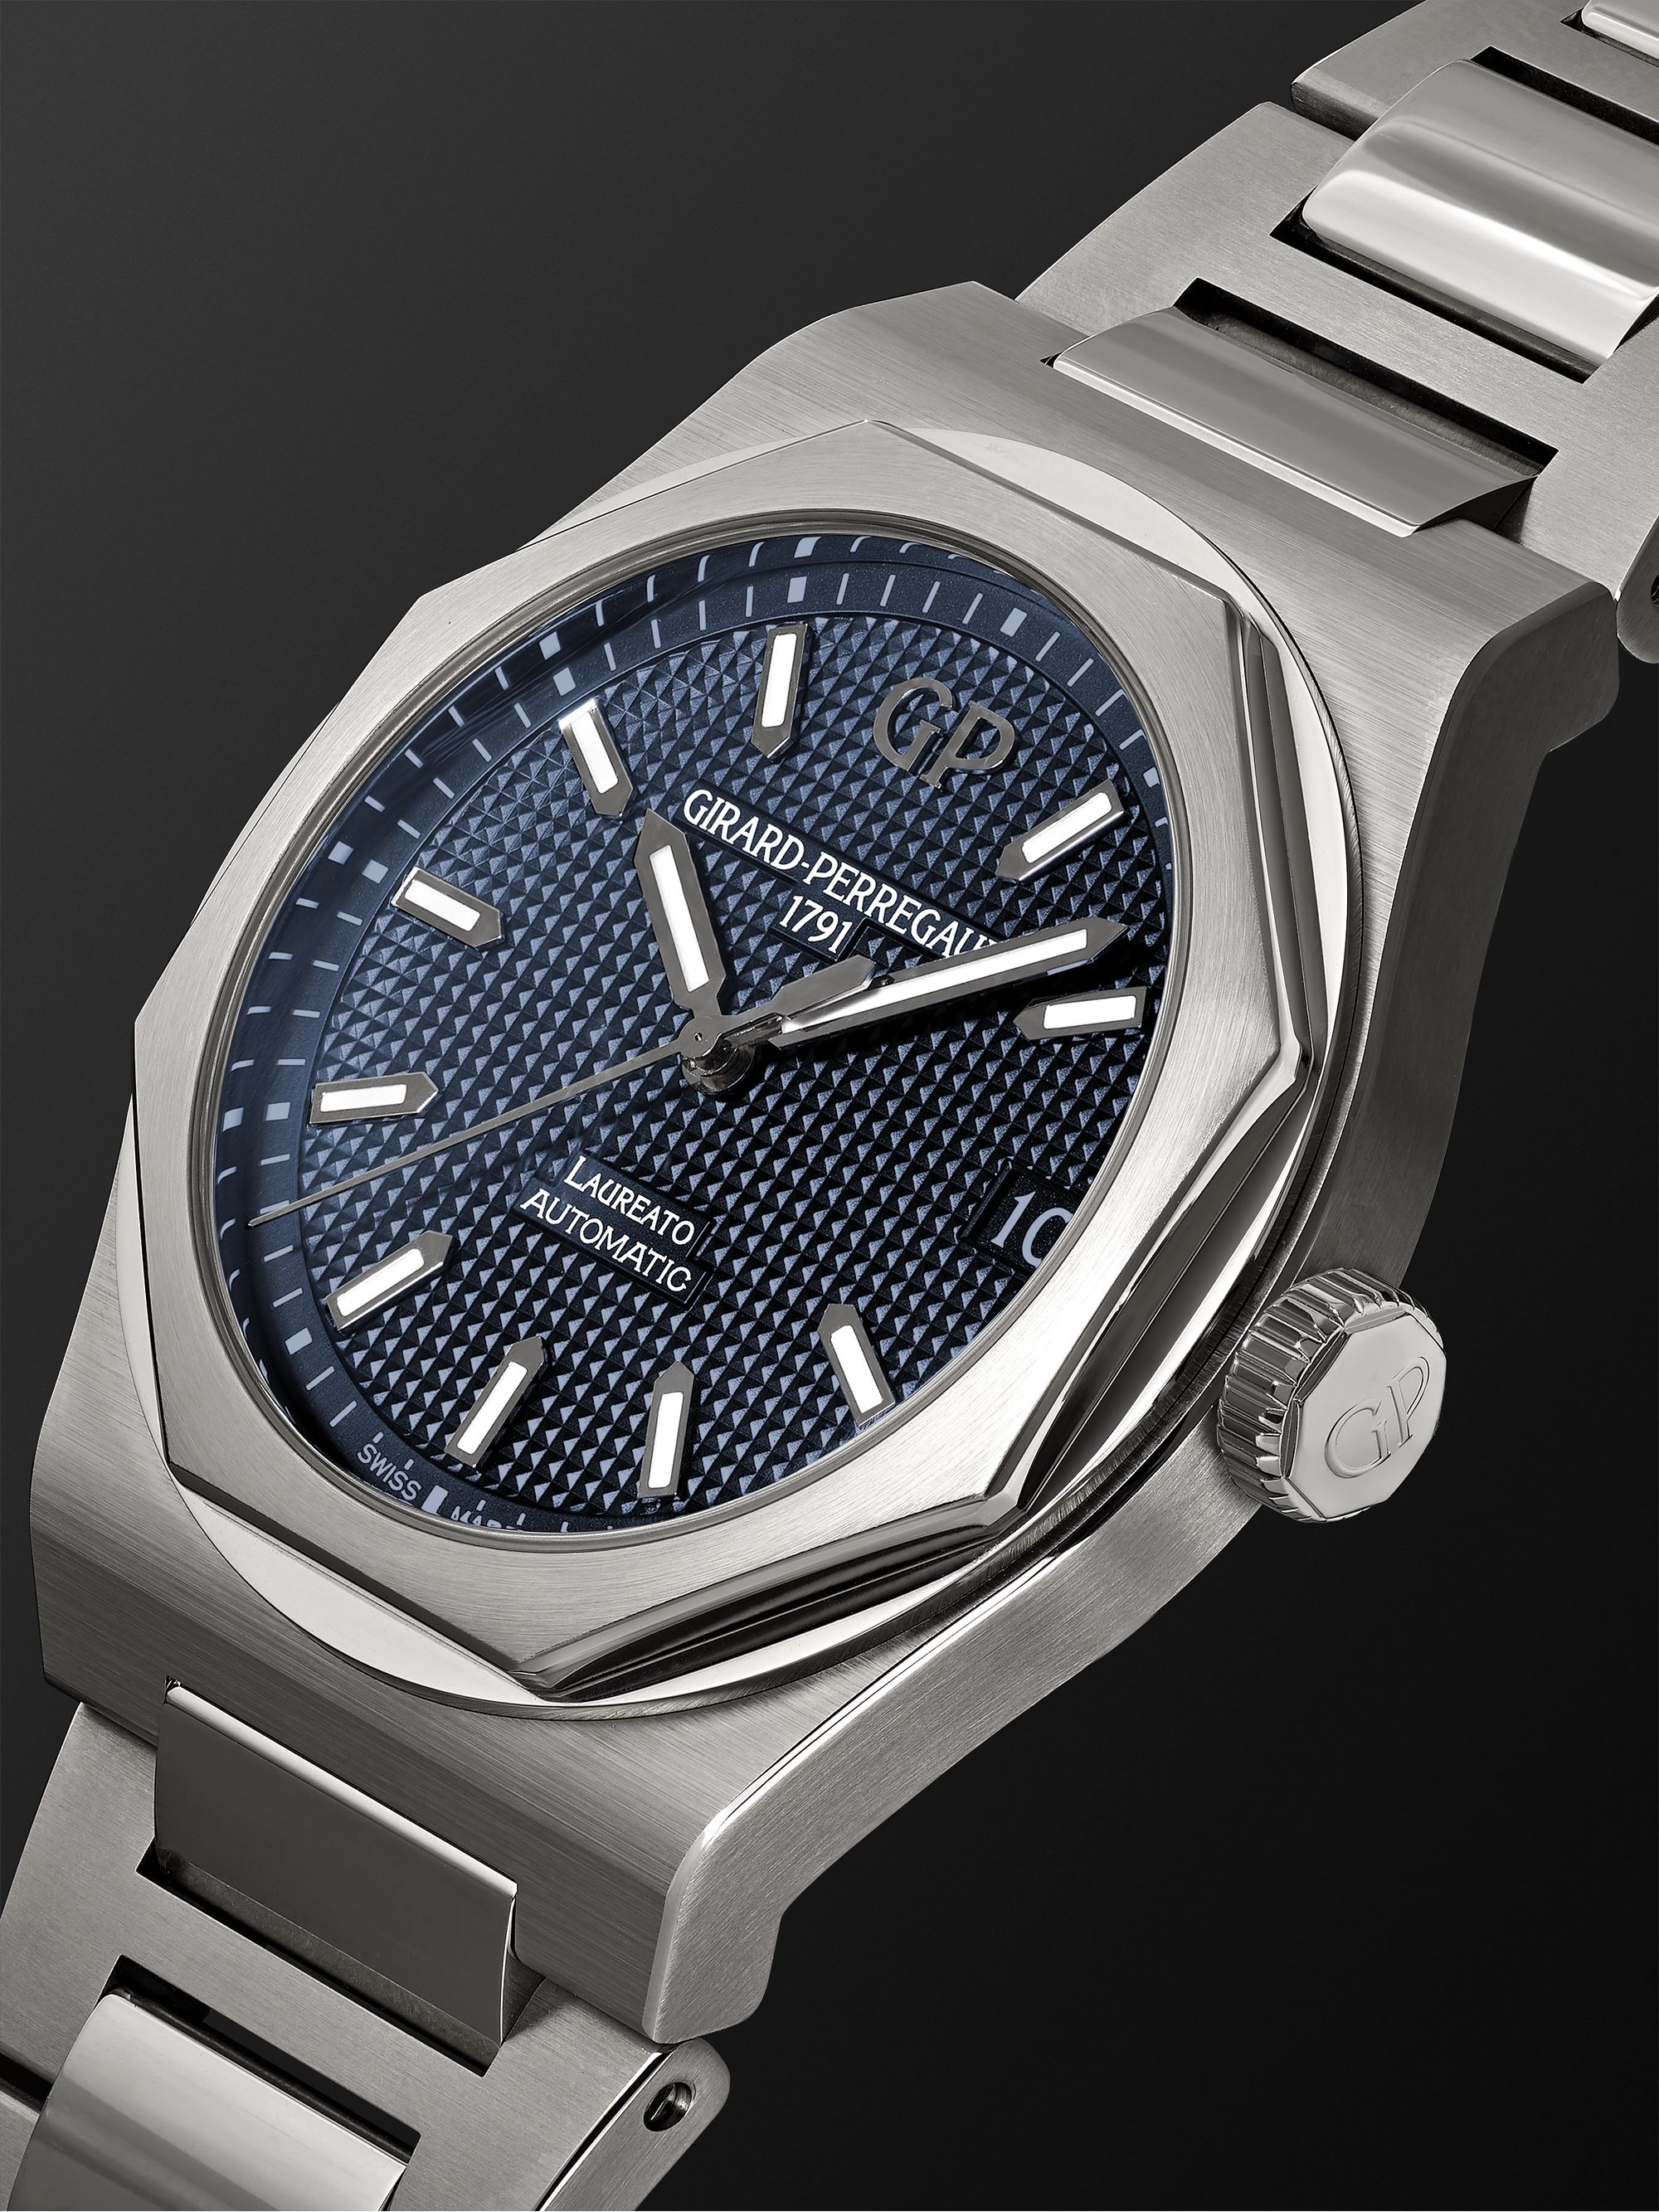 GIRARD-PERREGAUX Laureato Automatic 42mm Stainless Steel Watch, Ref. No. 81010-11-431-11A